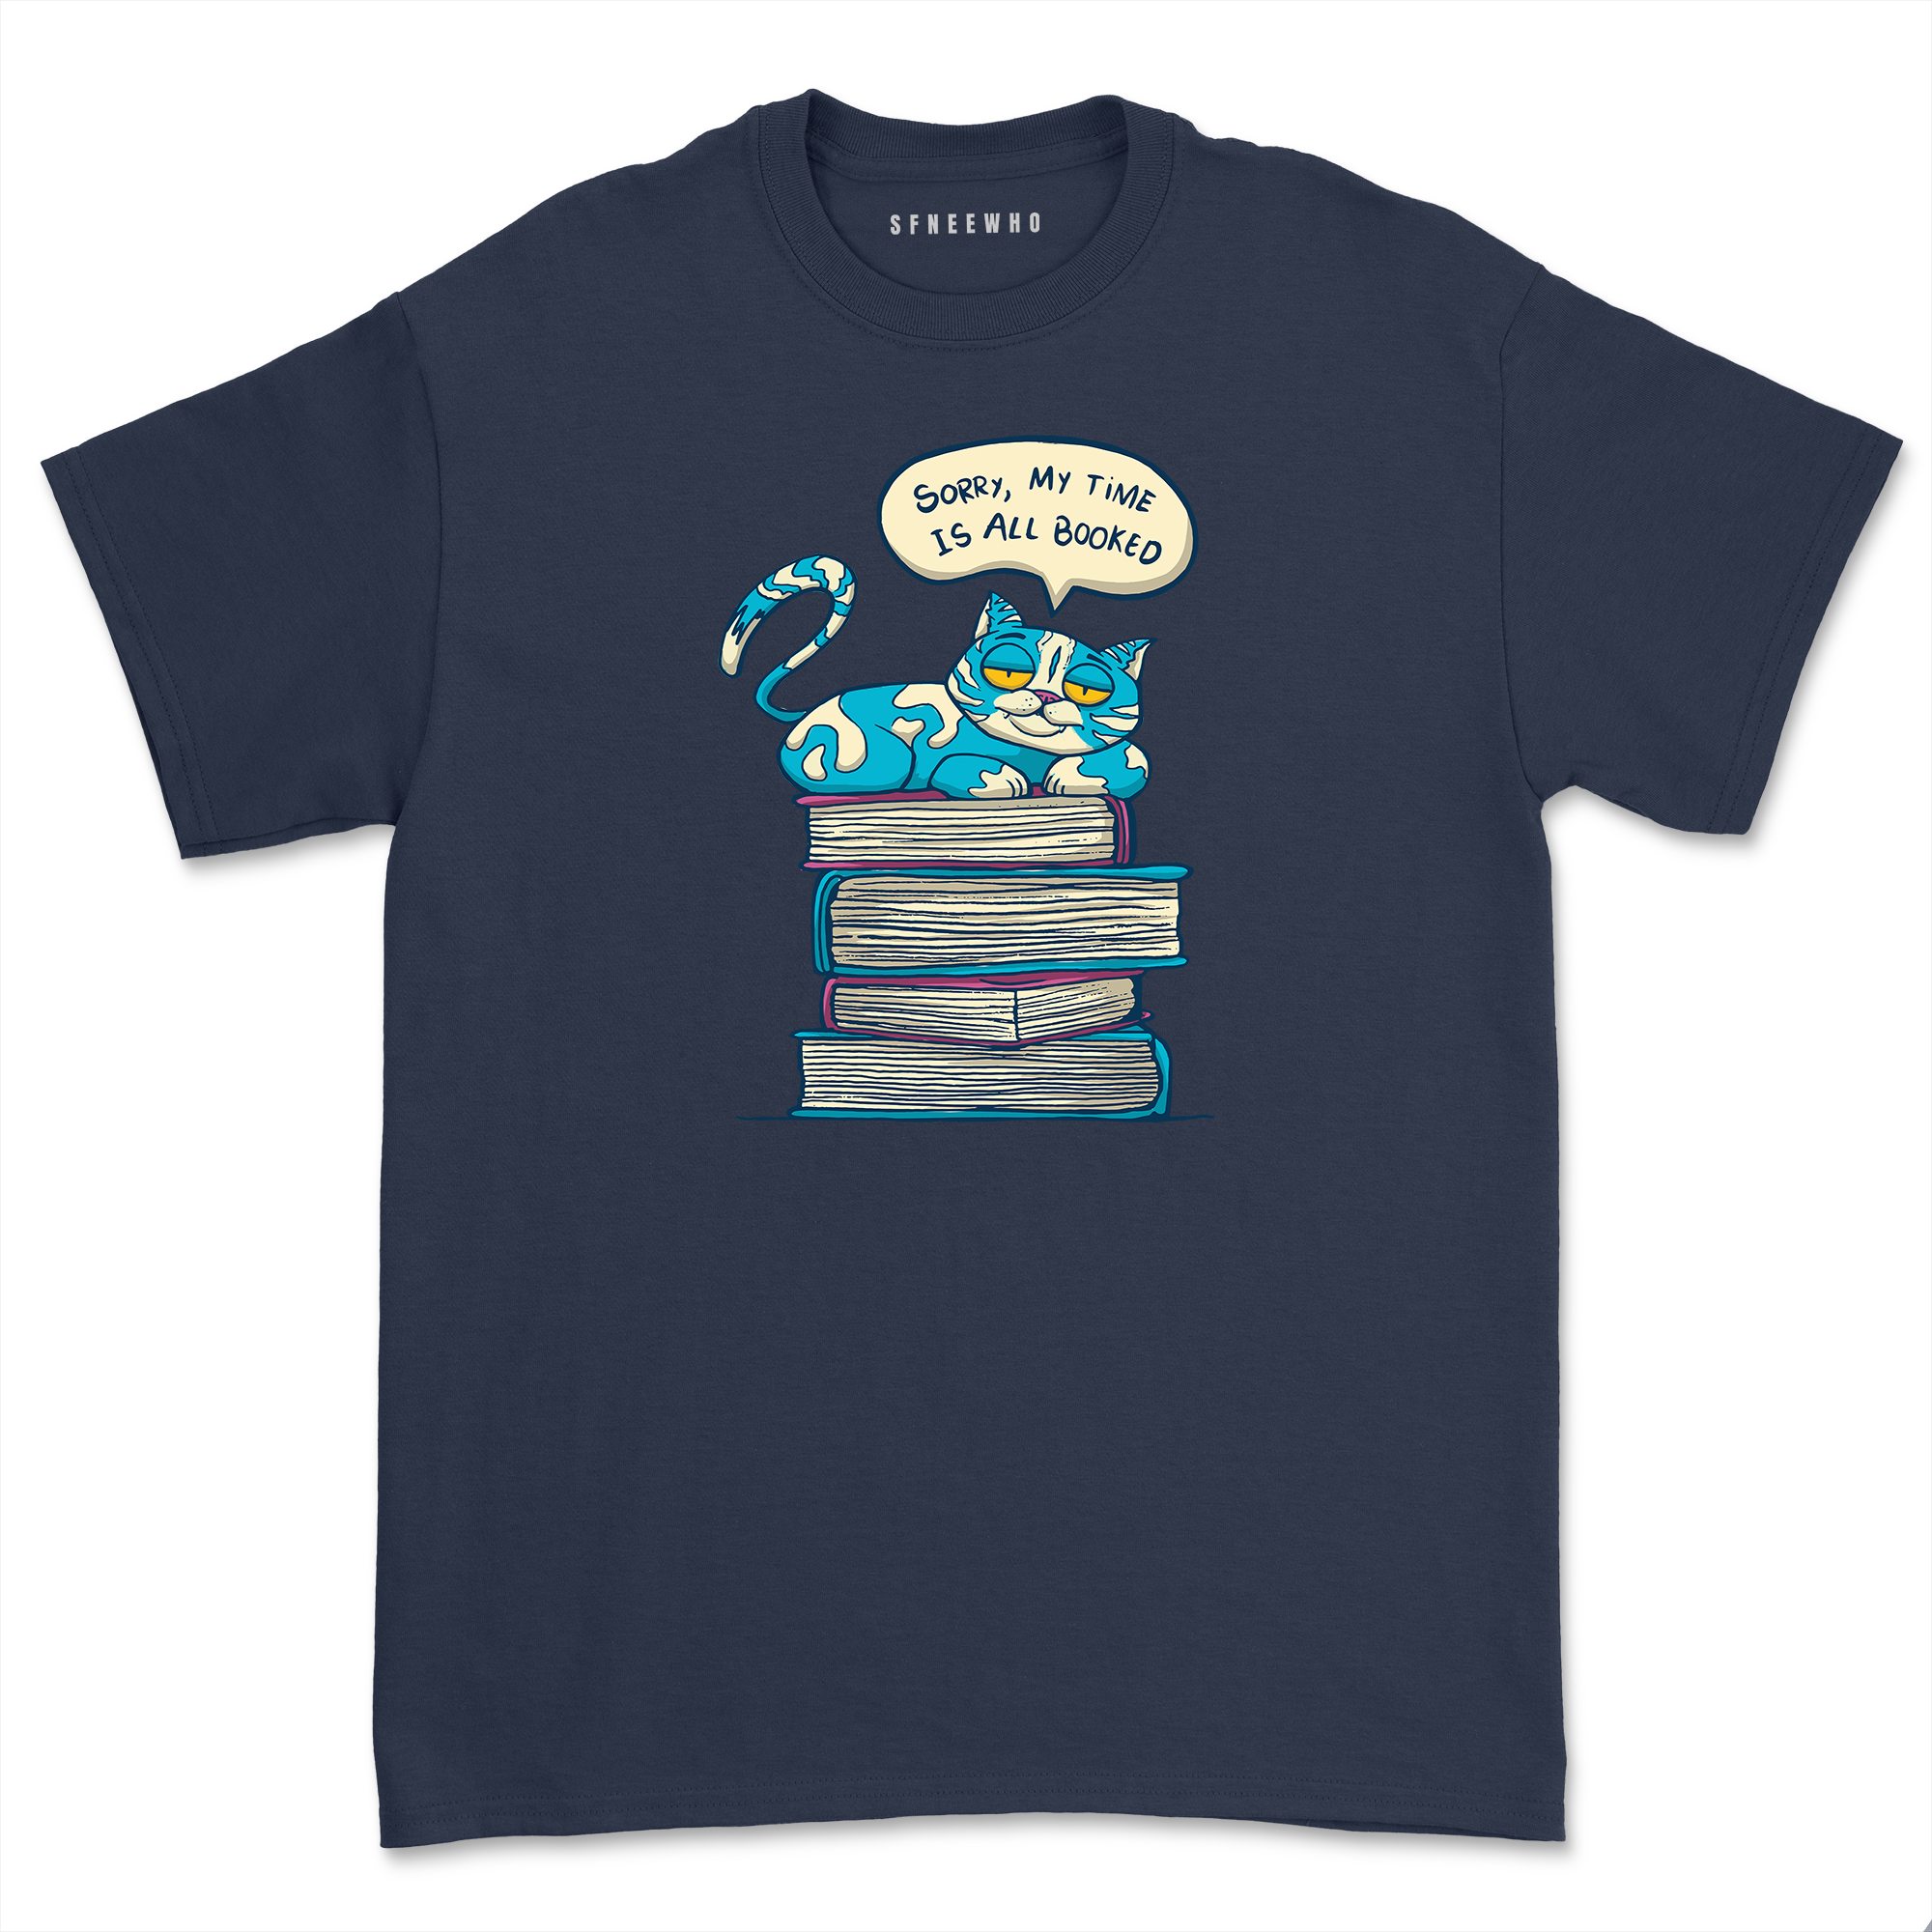 My time is booked cat tshirt photo